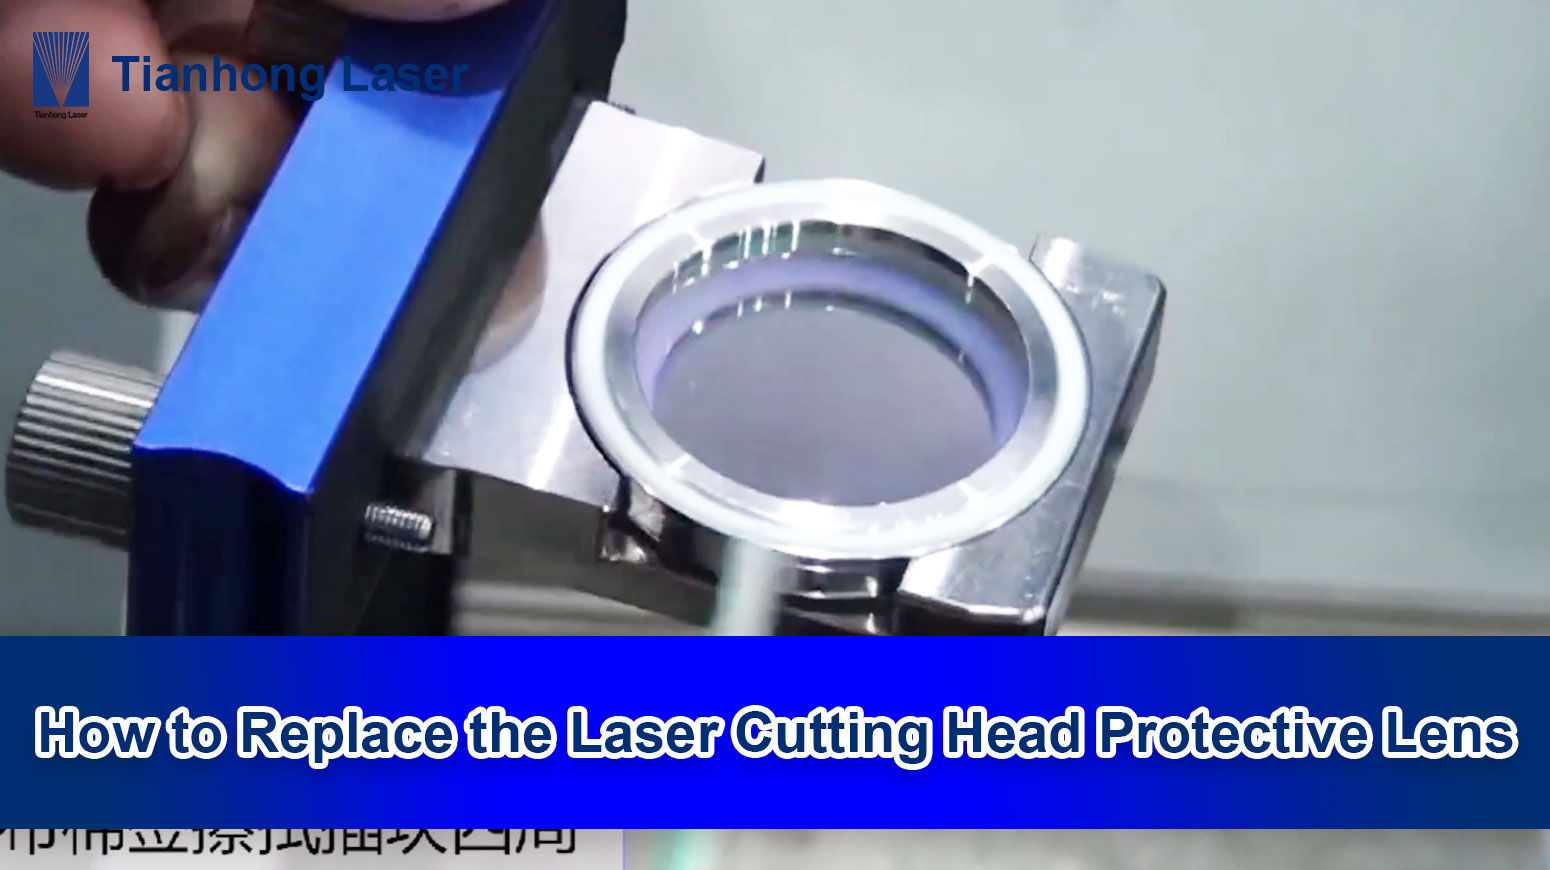 How to Replace the Laser Cutting Head Protective Lens